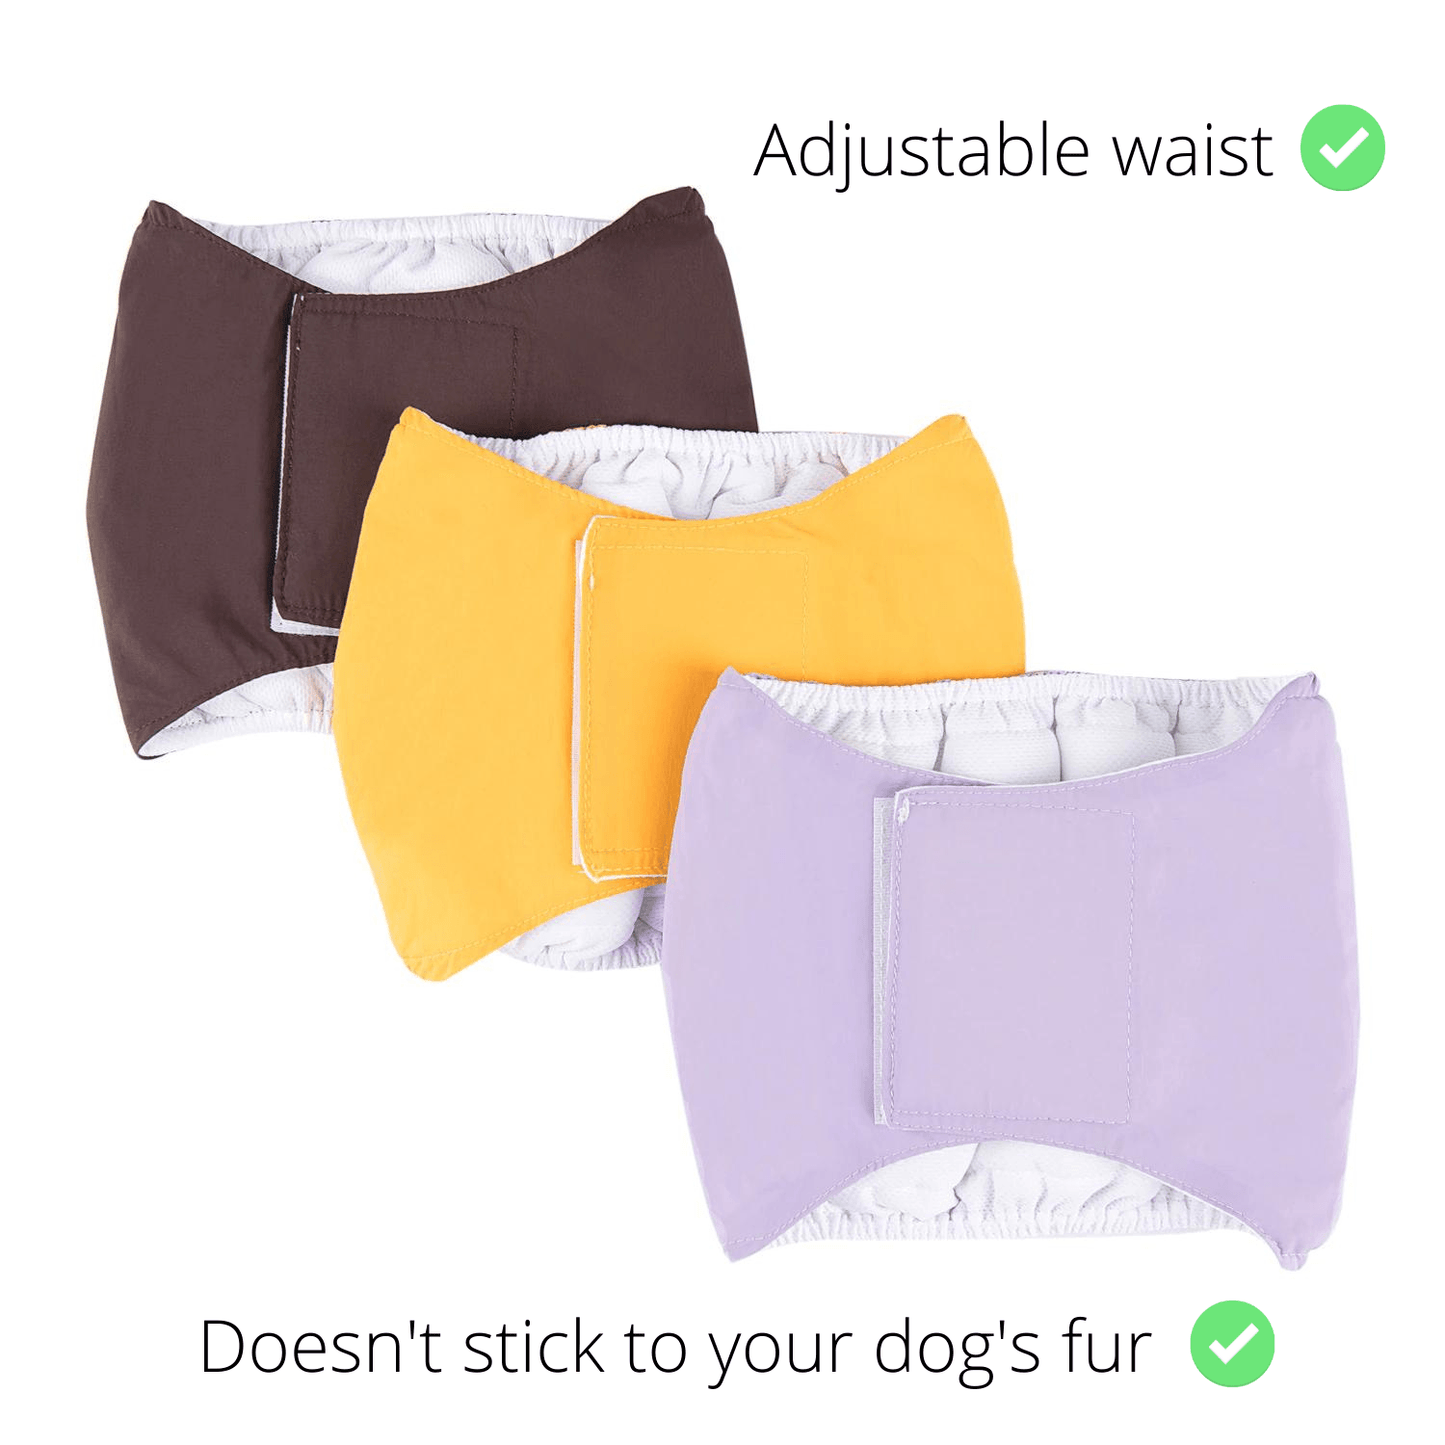 3 fastened male dog diapers